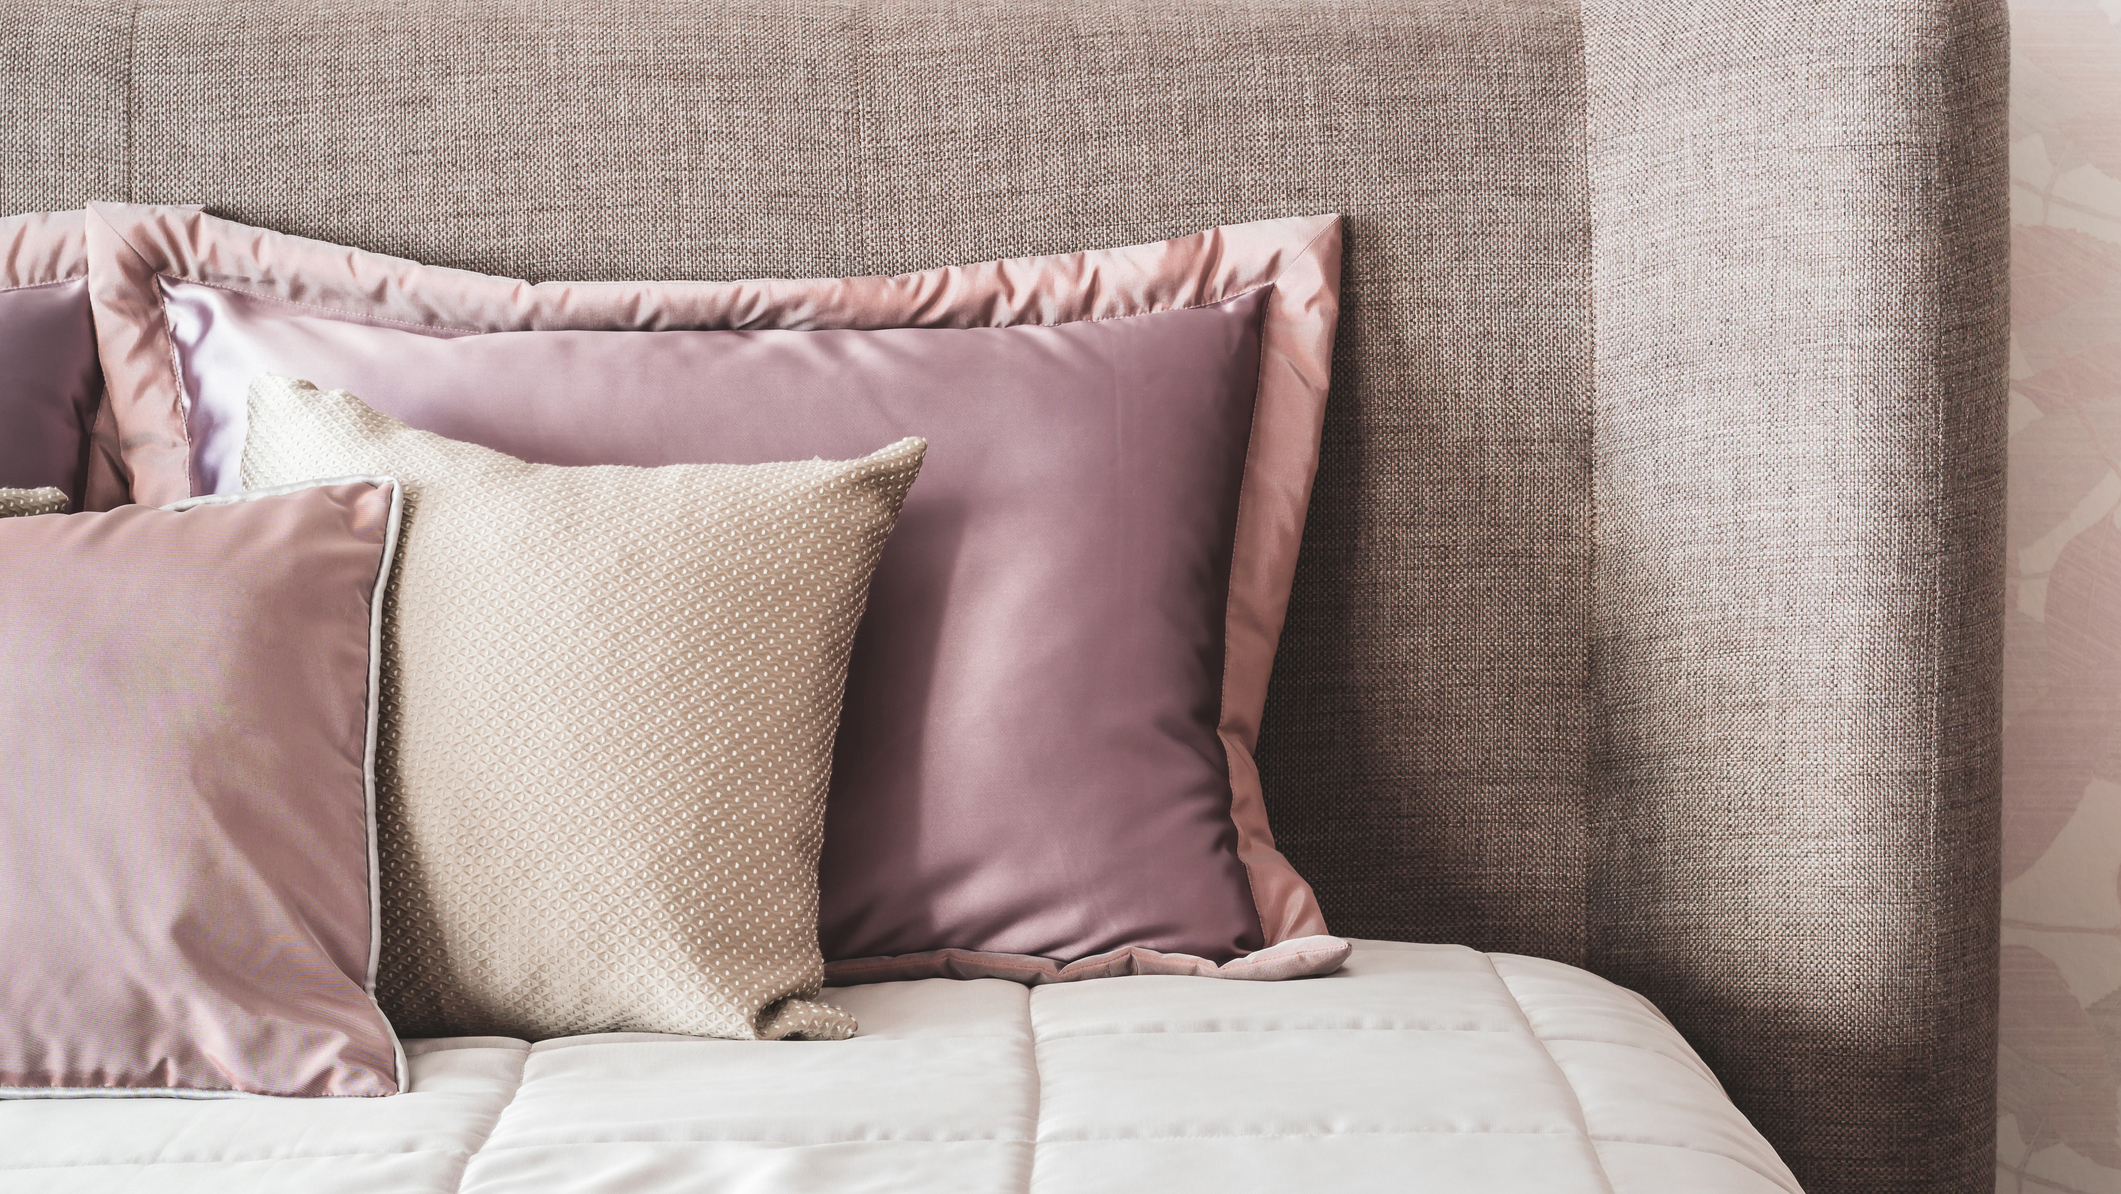 Silk or satin pillowcase: which one is better for your skin and sleep? |  Woman & Home